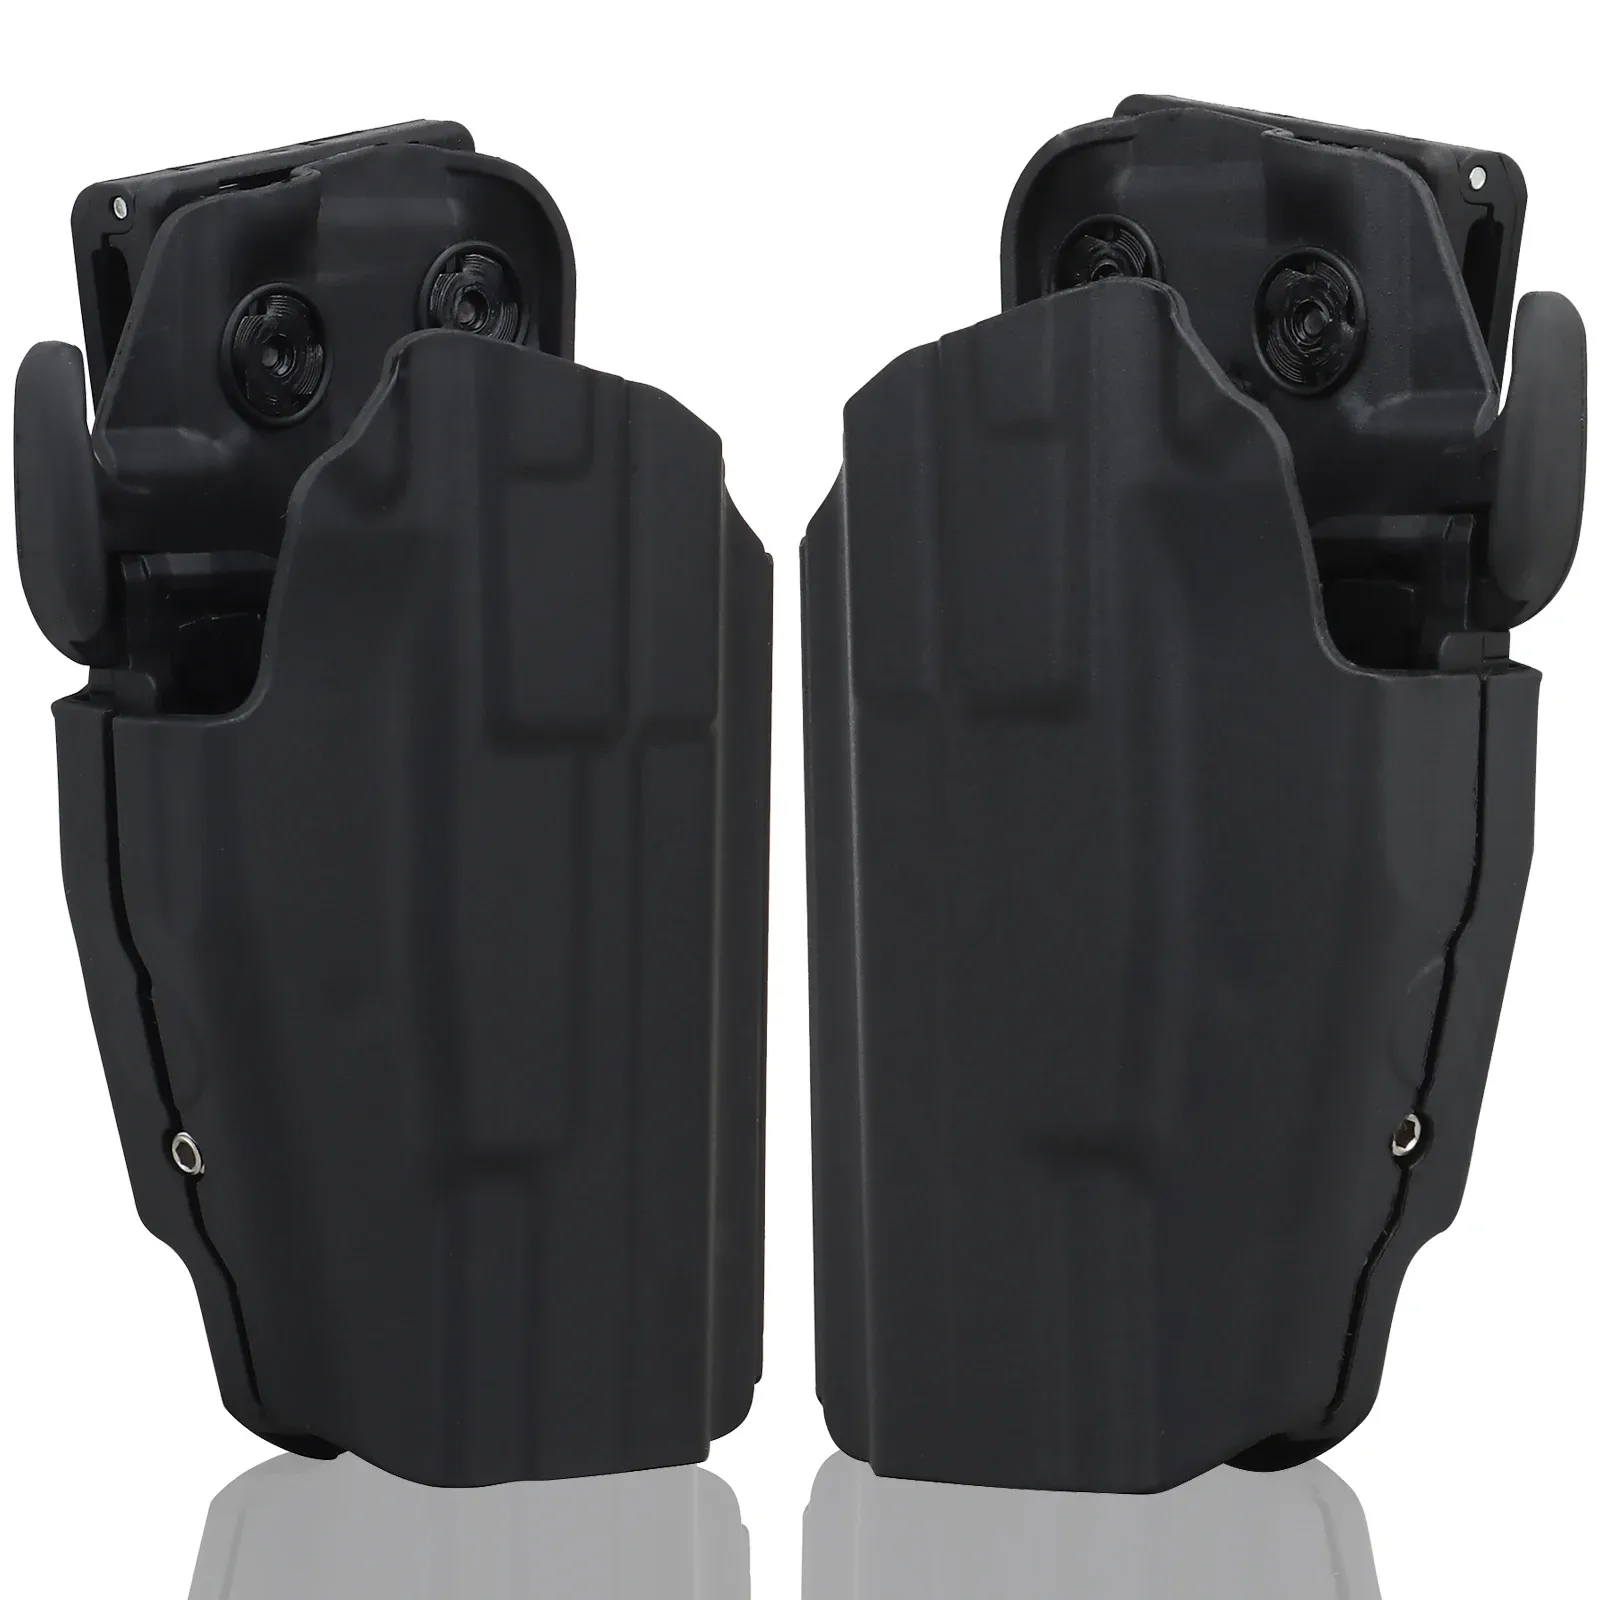 Holsters Tactical Left Right Hand Pistol Holster for Glock 17 20 21 22 31/H&K VP40 45/S&W M&P 22 45 9mm/SIGP225/Taurus PT24 PT809 PT840